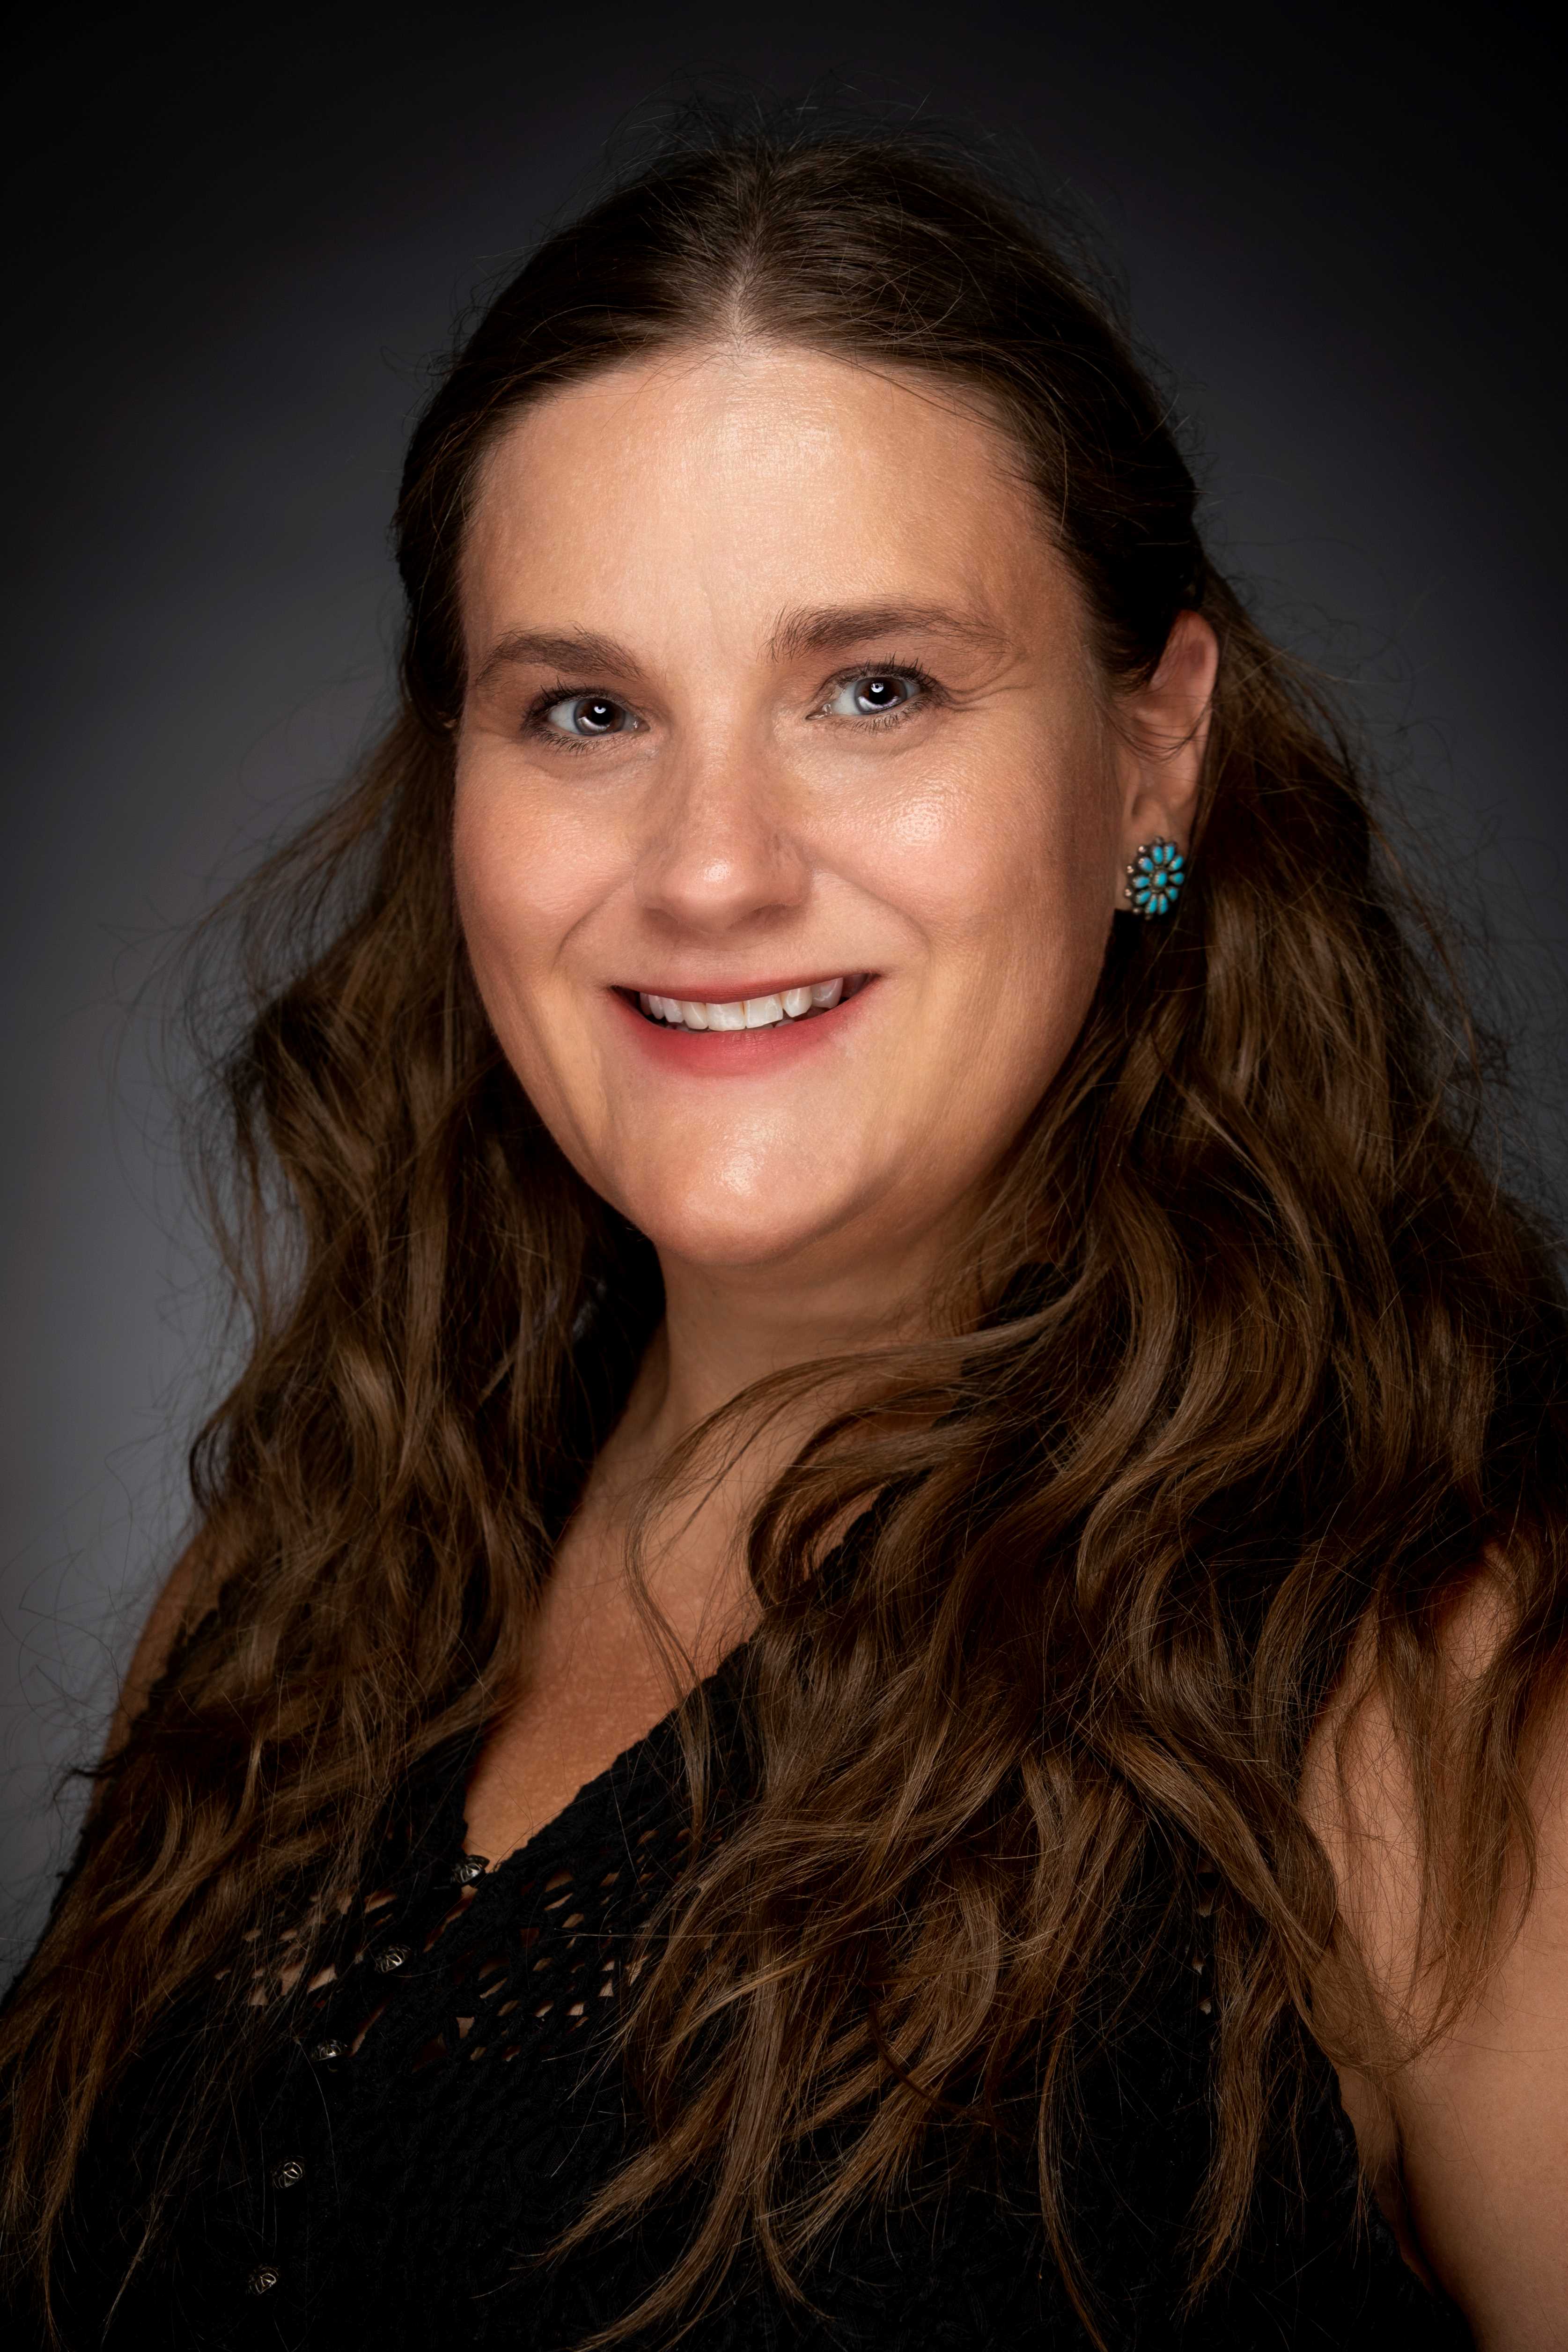 This is a photo of Maria Blevins, a Faculty Fellow for the UVU Center for the Study of Ethics.